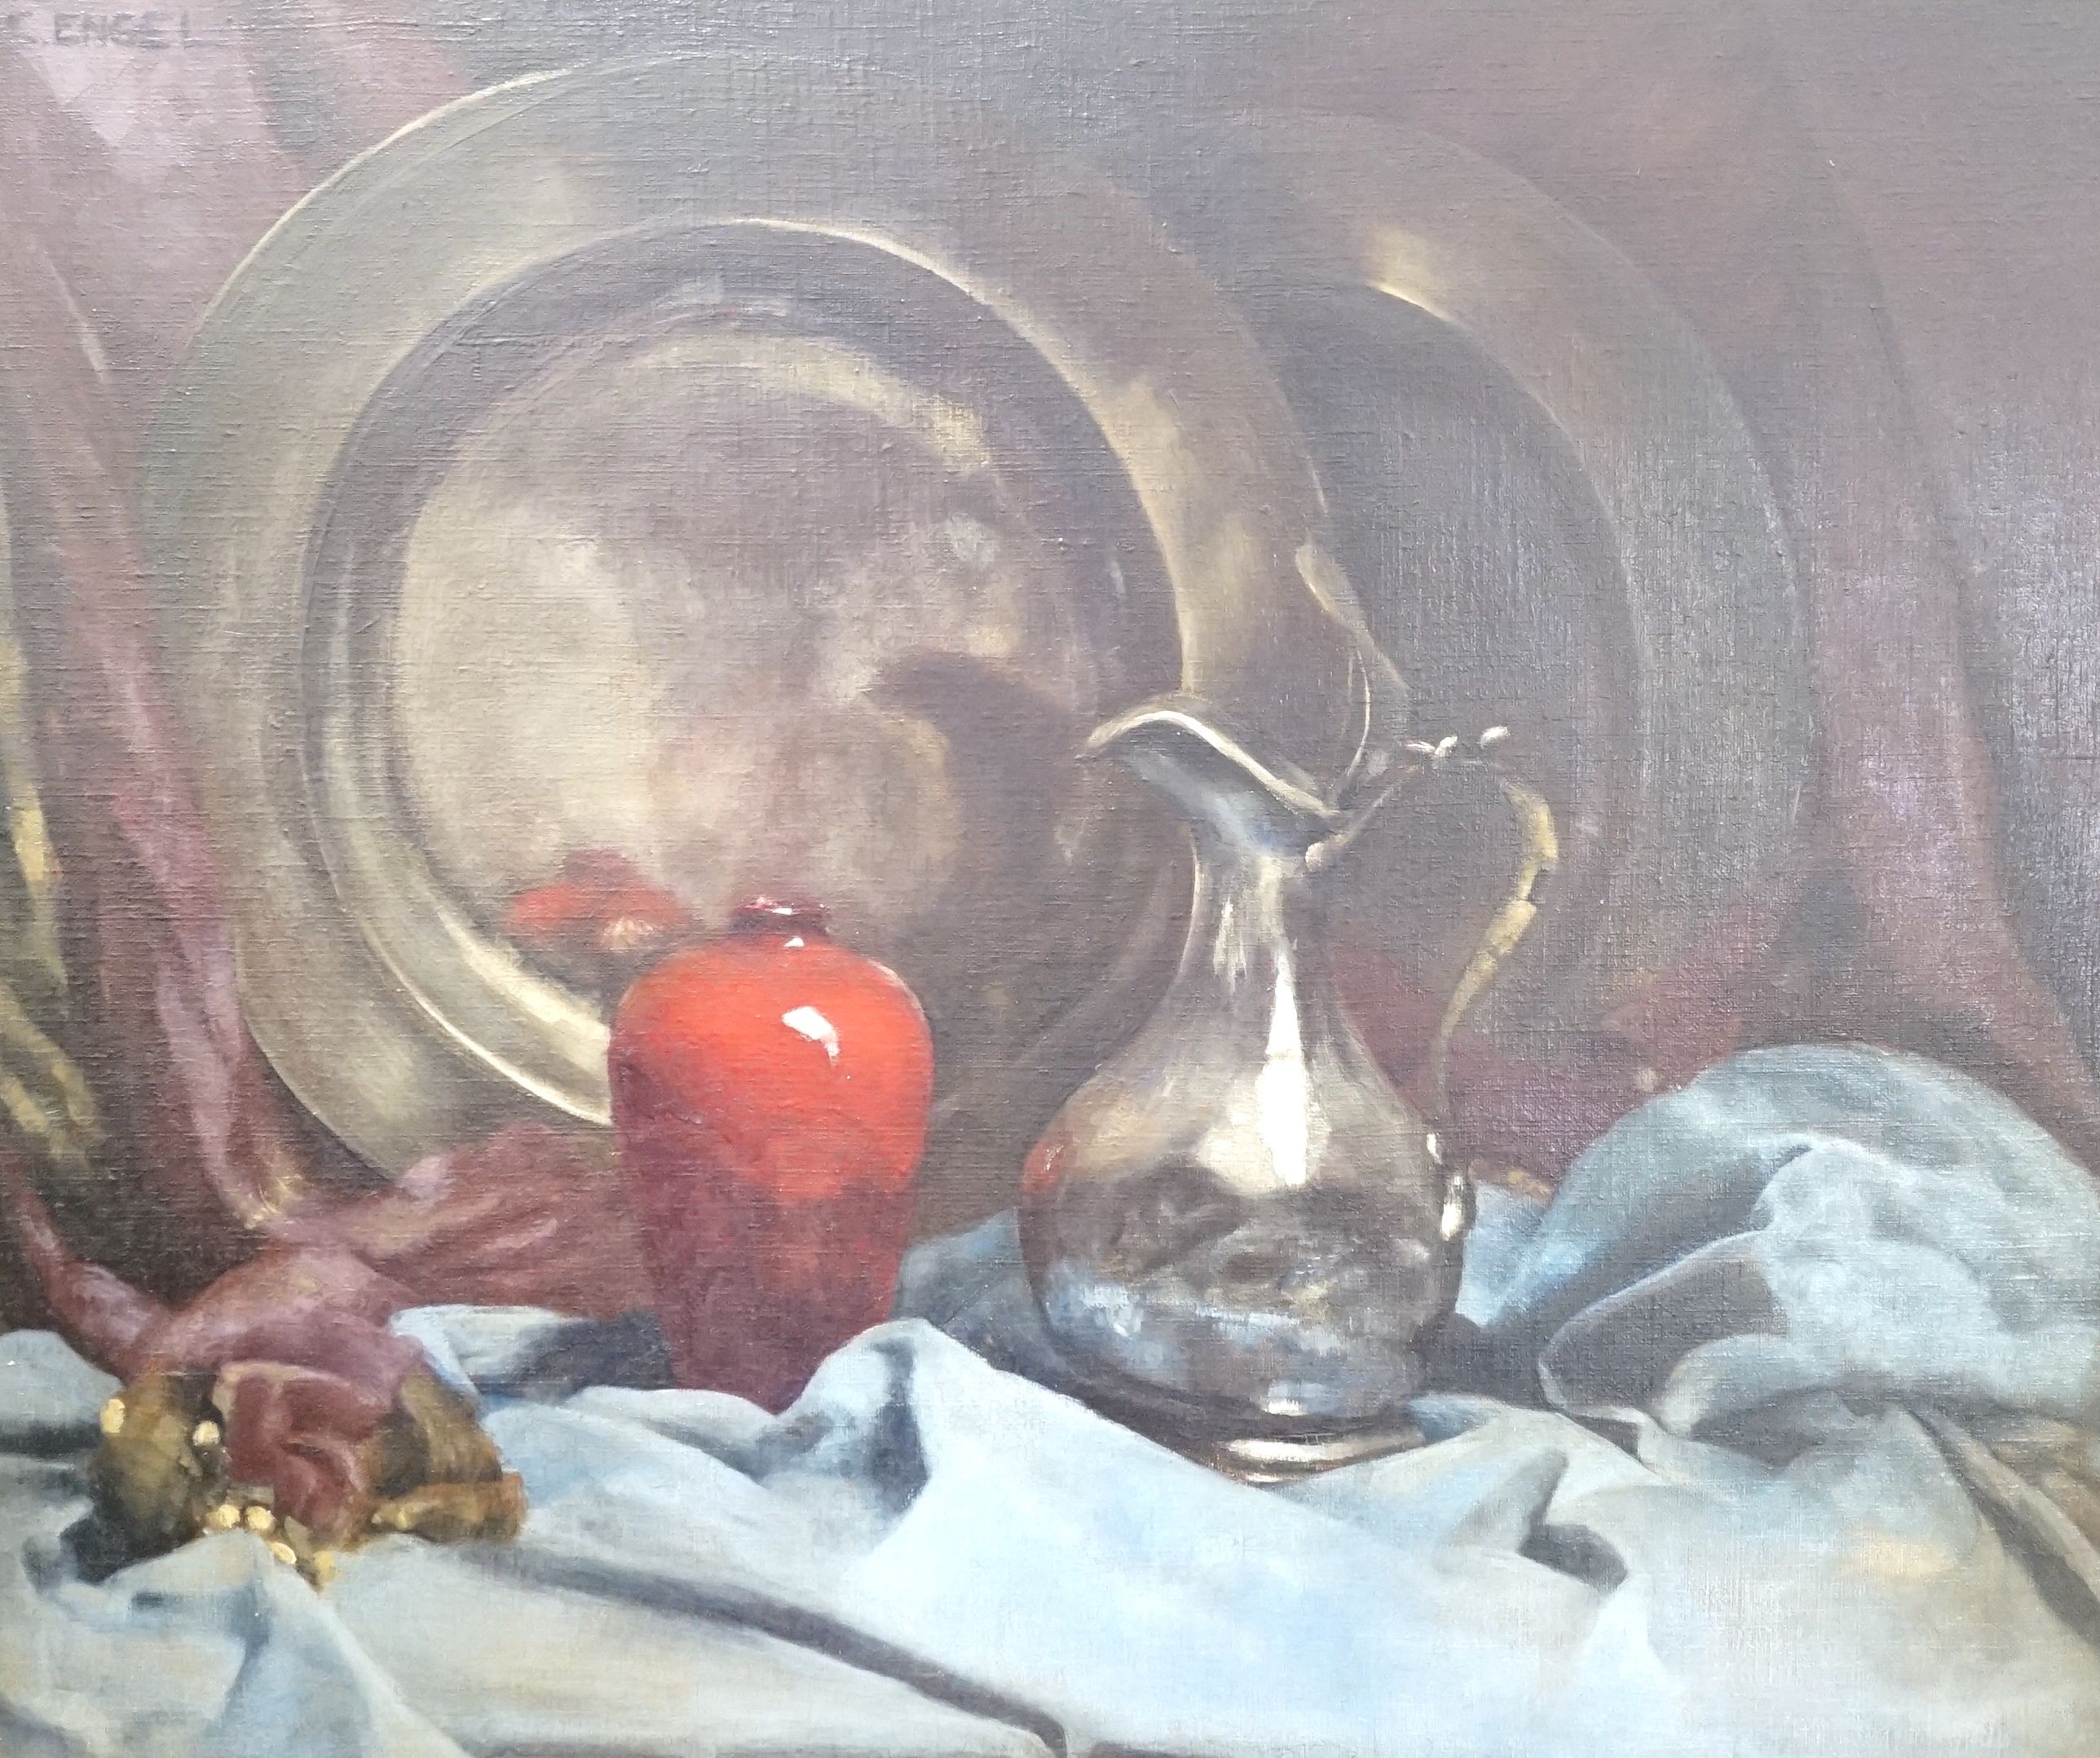 C. Engel, oil on canvas, still life of a vase and pewter ware, signed, 52 cm at 62 cm